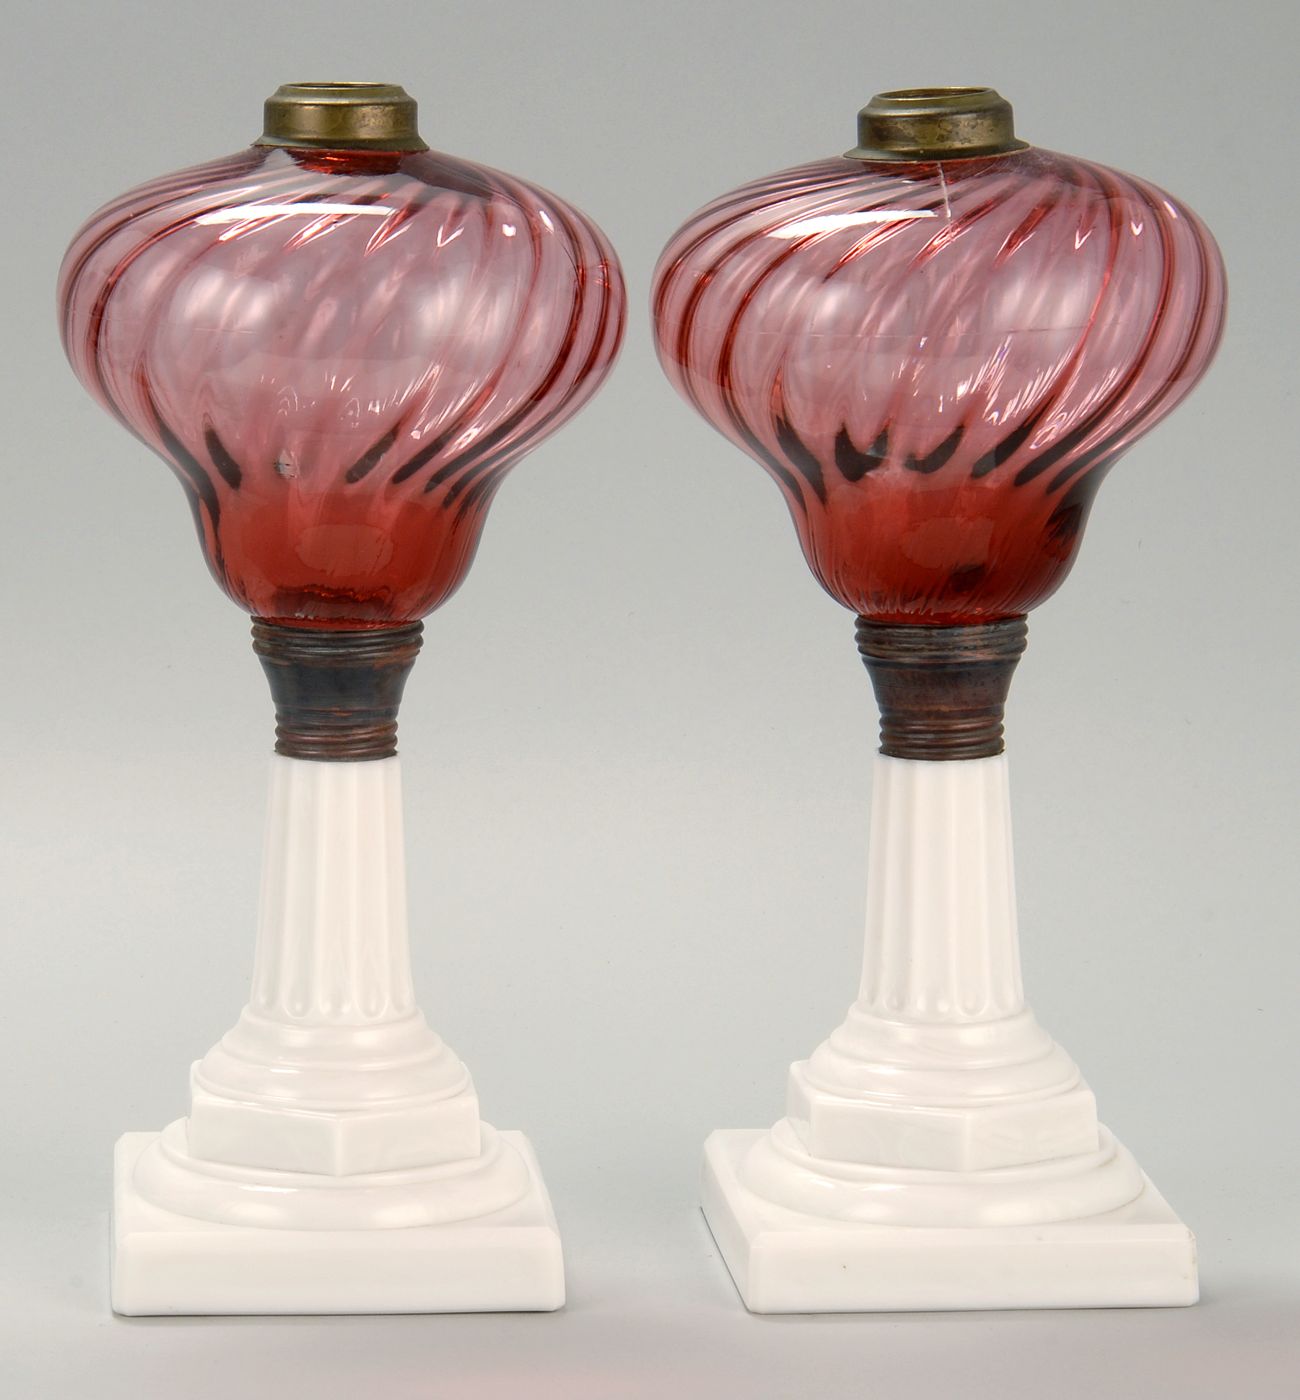 PAIR OF CRANBERRY GLASS OIL LAMPSEarly 14b39a